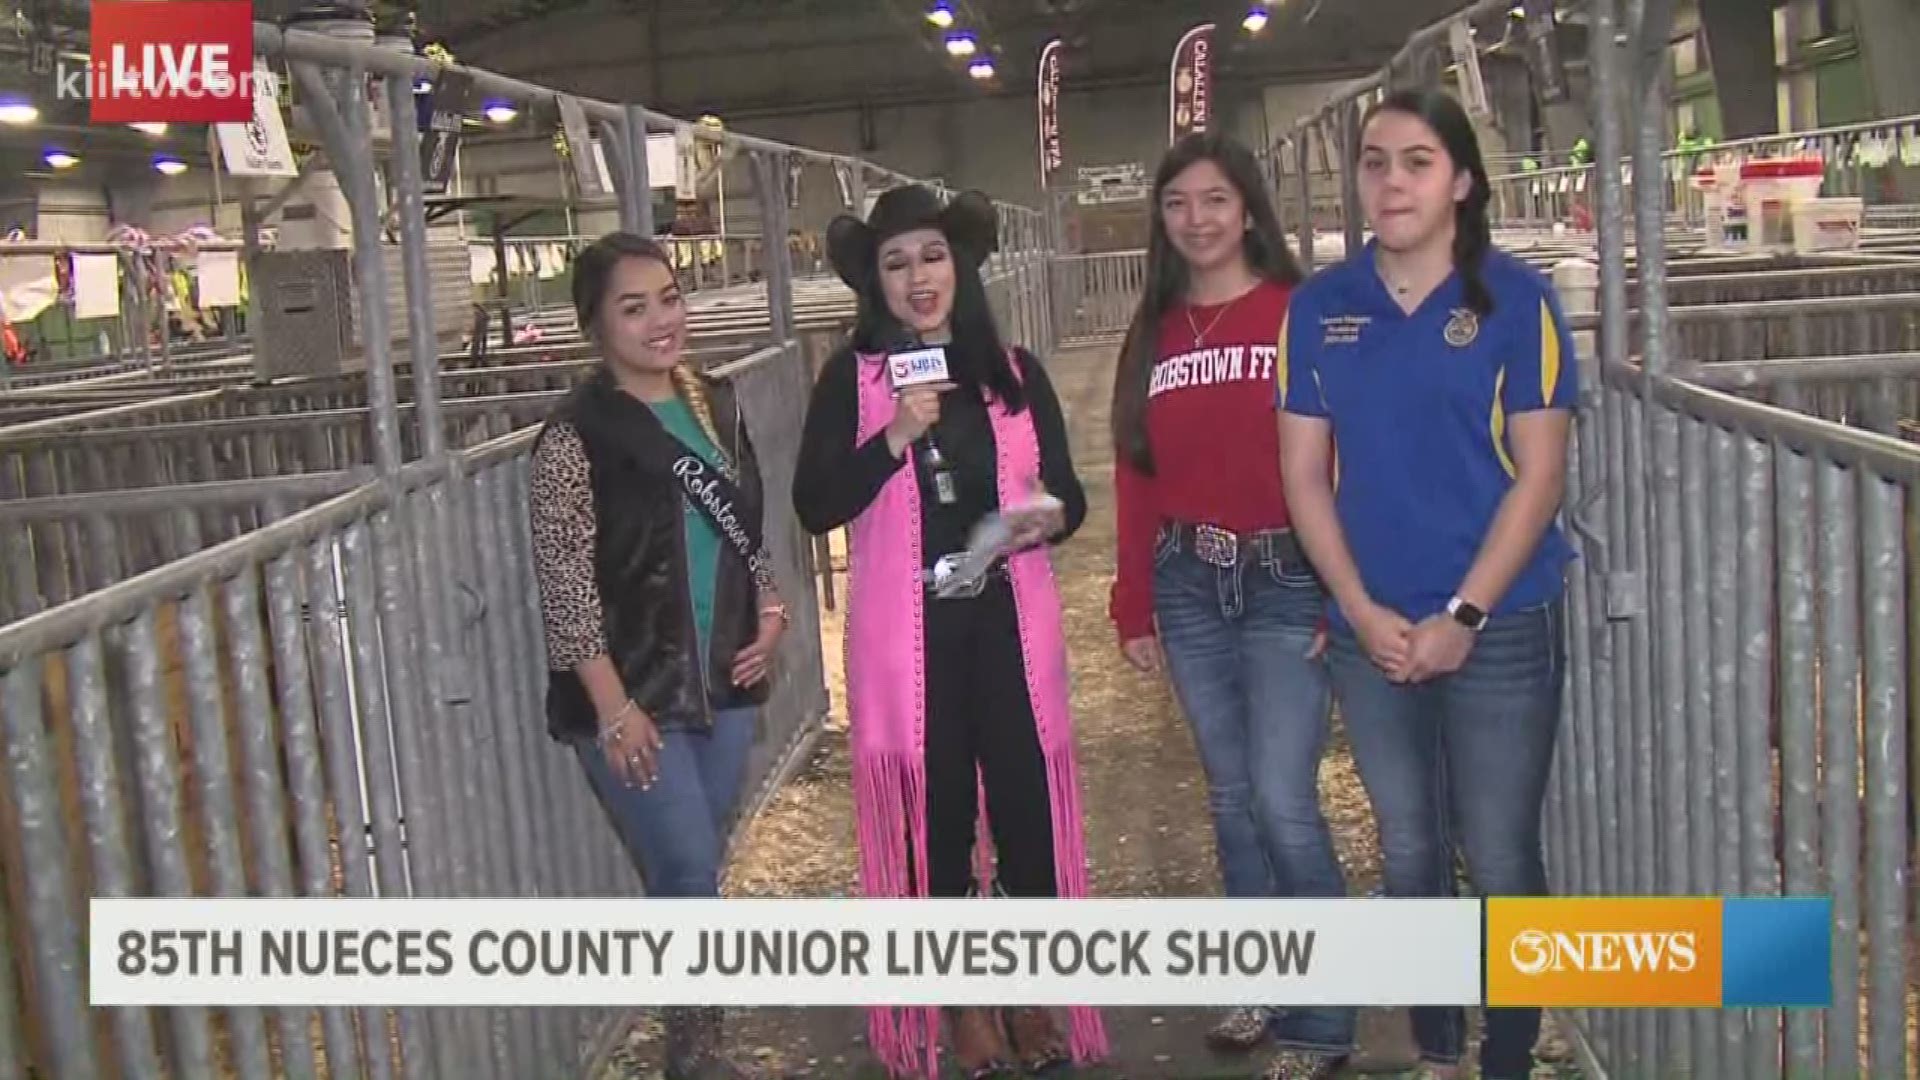 The 85th annual Nueces County Junior Livestock Show is underway at the Richard M. Borchard Fairgrounds.